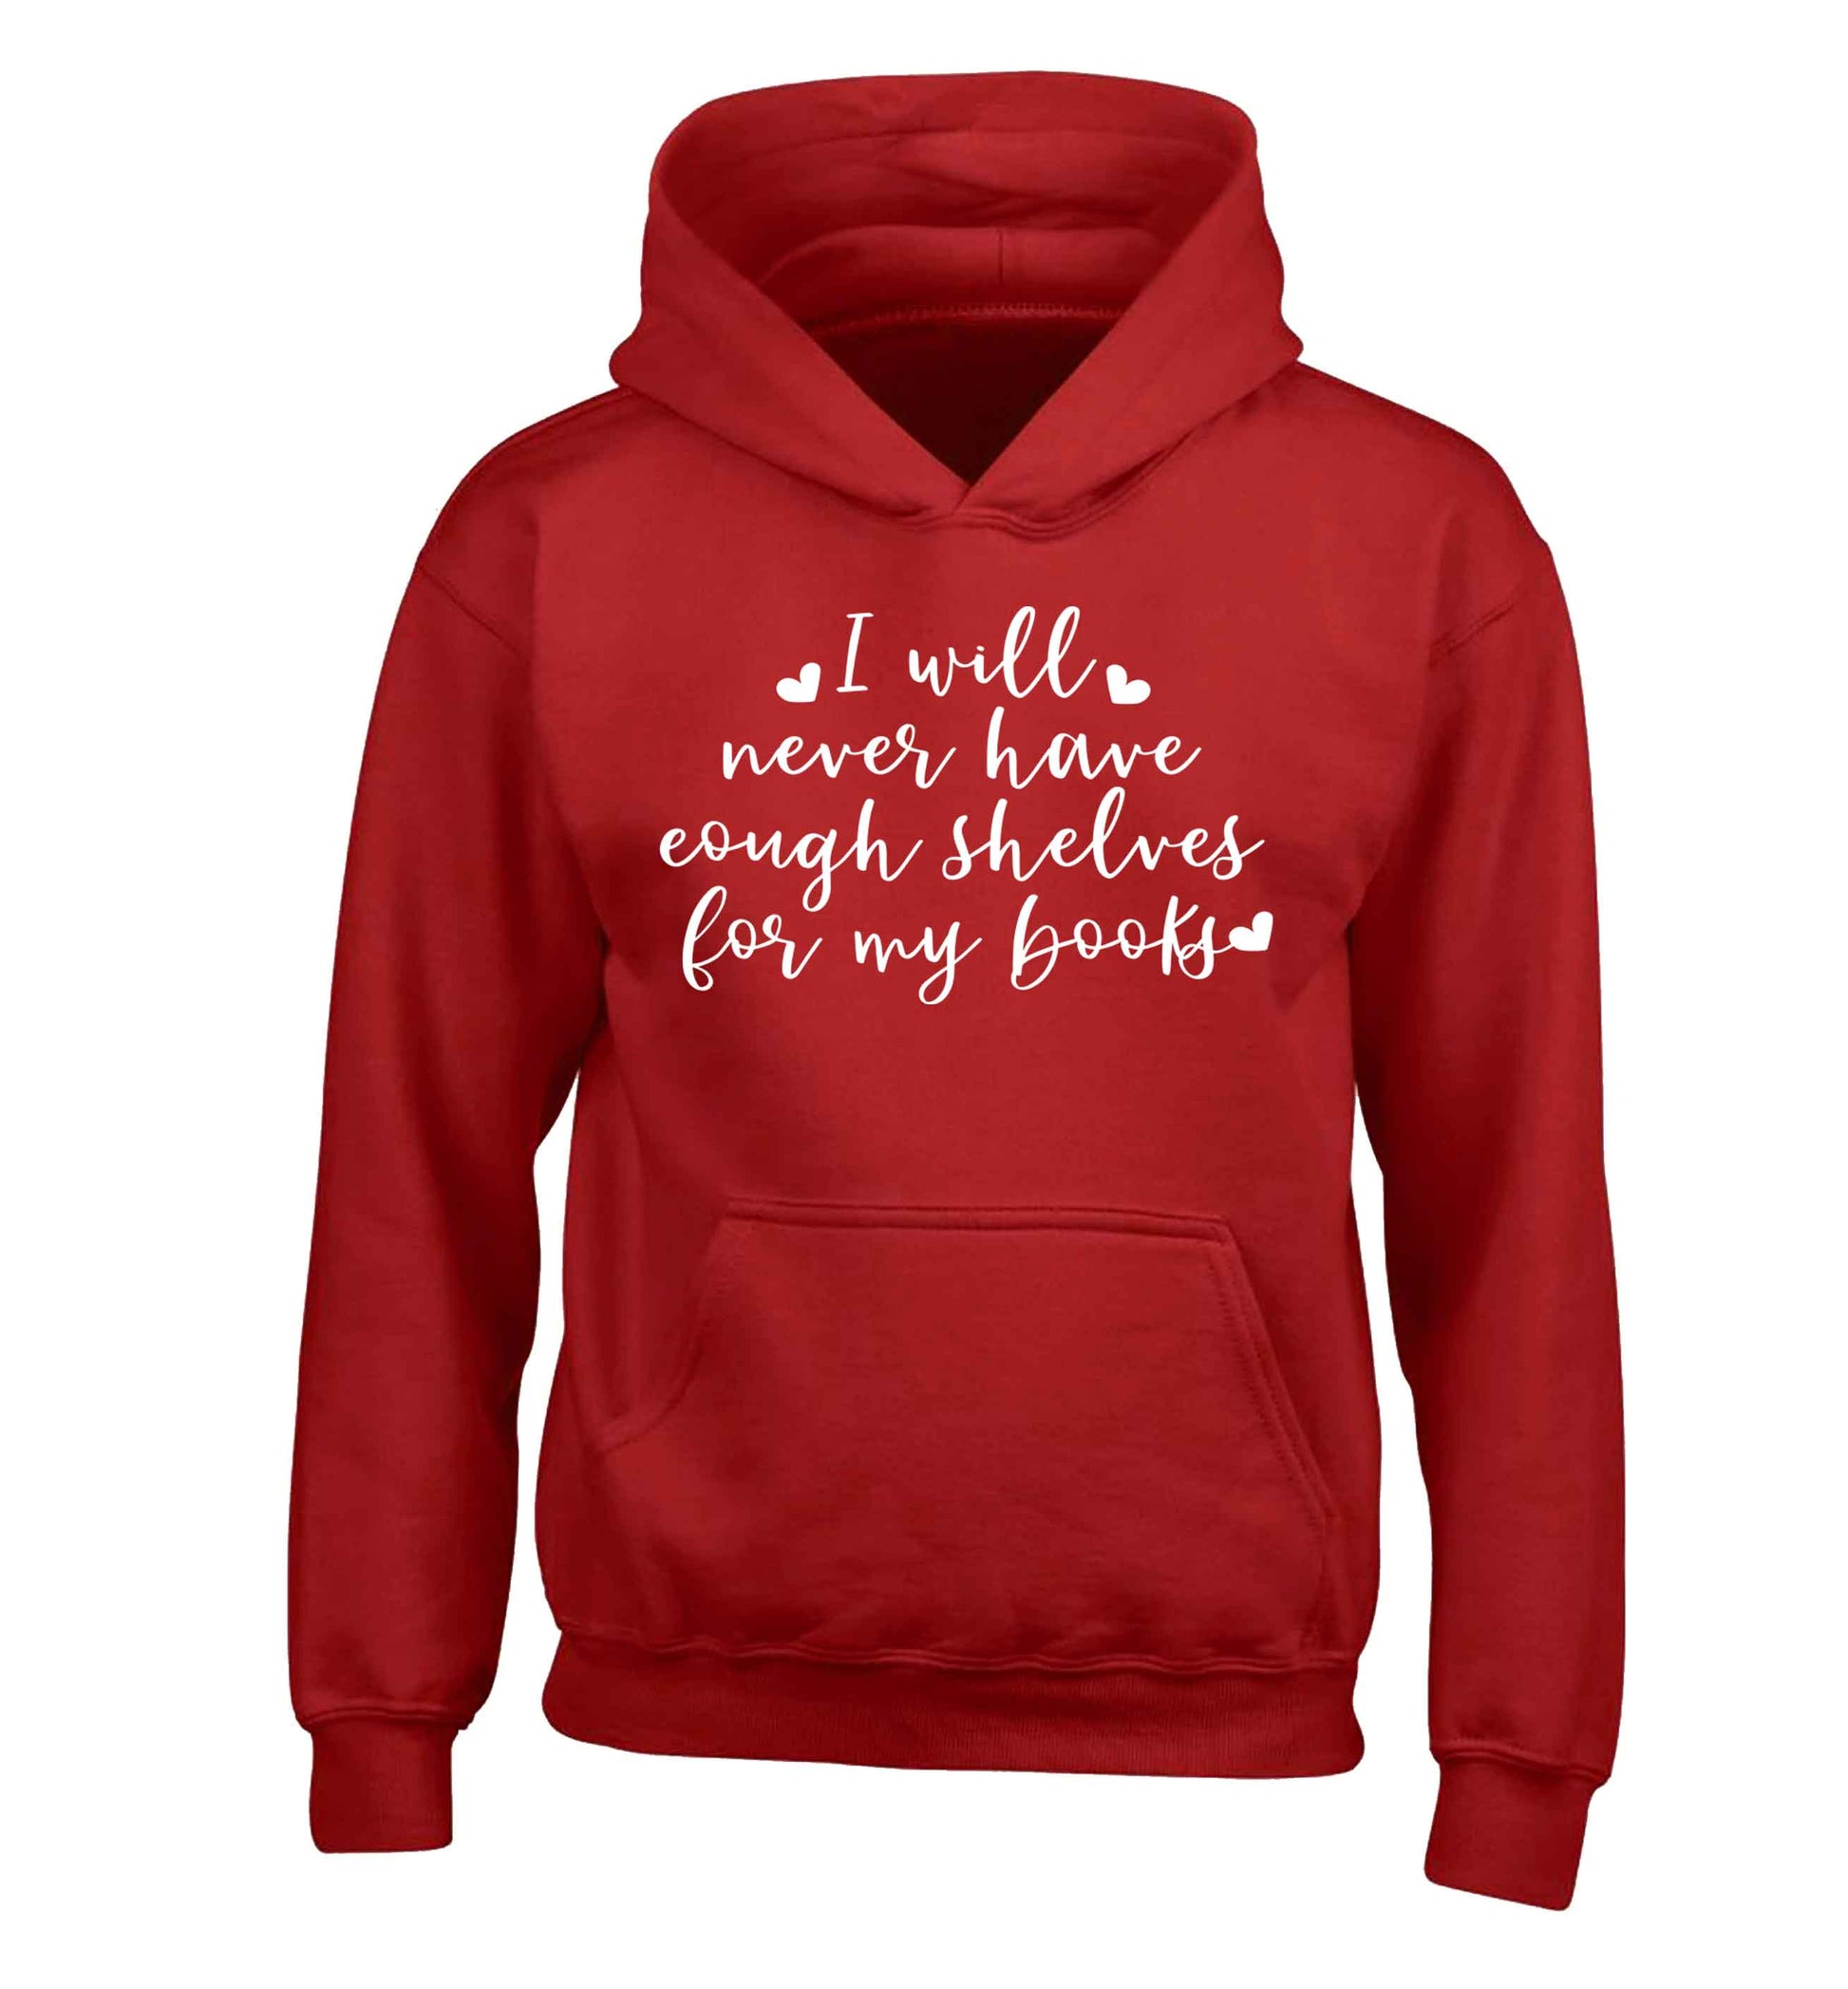 I will never have enough shelves for my books children's red hoodie 12-13 Years